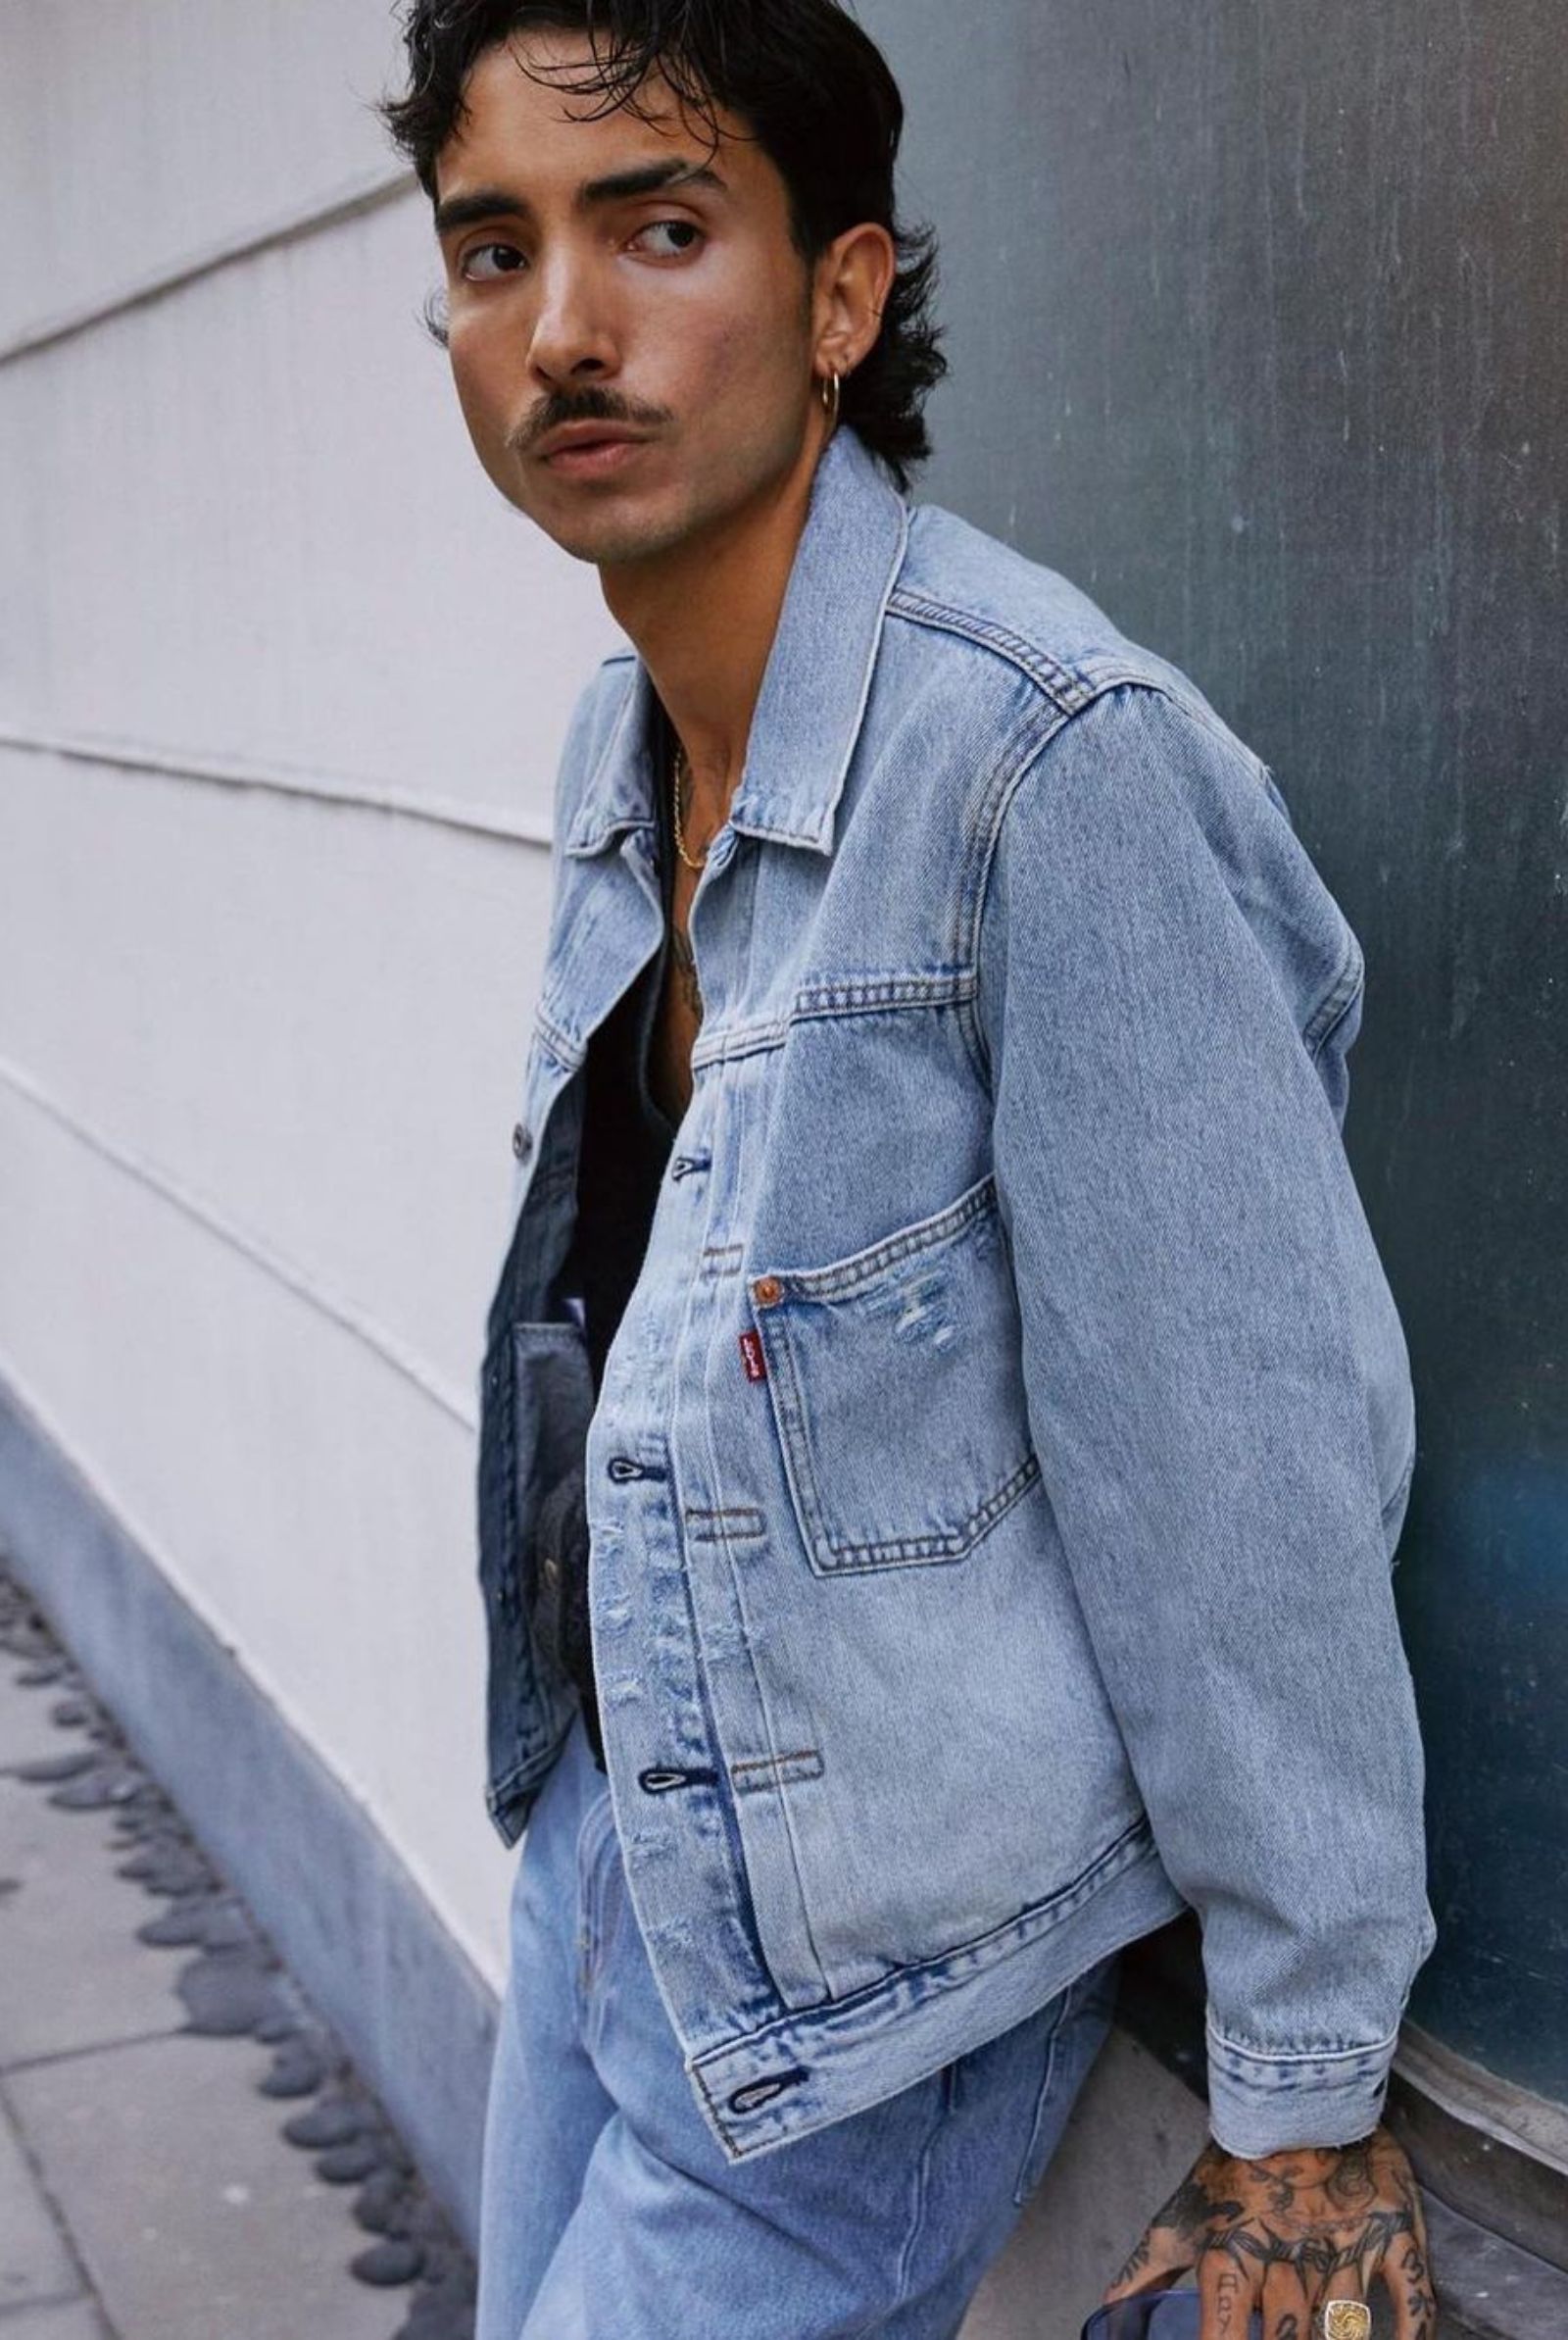 The revival of Canadian tuxedo